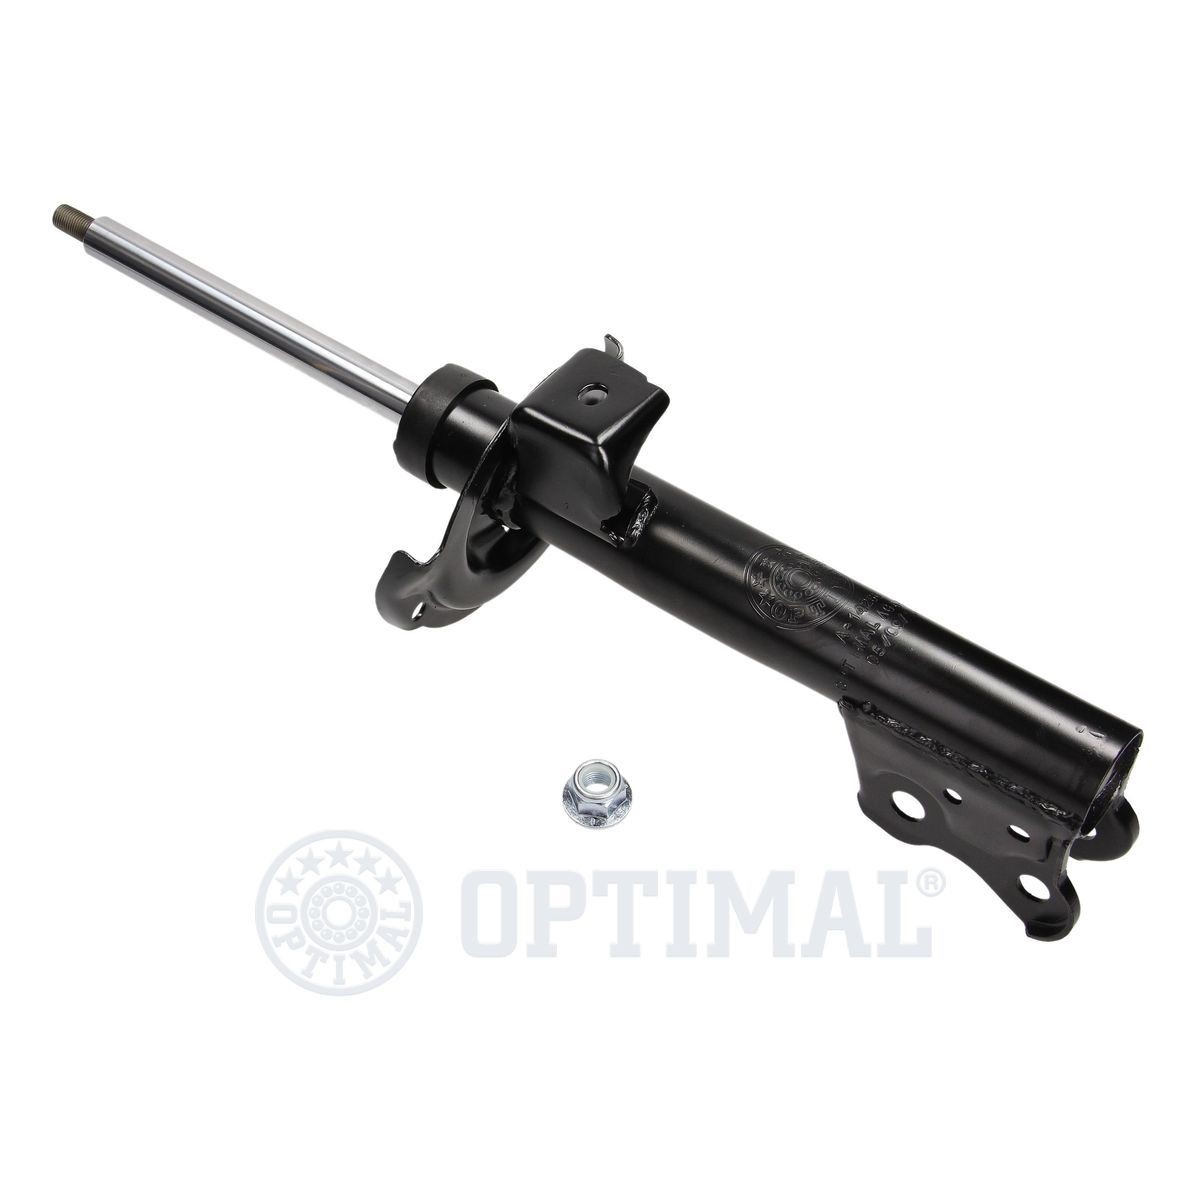 OPTIMAL A-1740G Shock absorber Right, Left, Rear Axle, Gas Pressure, Twin-Tube, Spring-bearing Damper, Bottom Fork, Top pin, M10x1,25